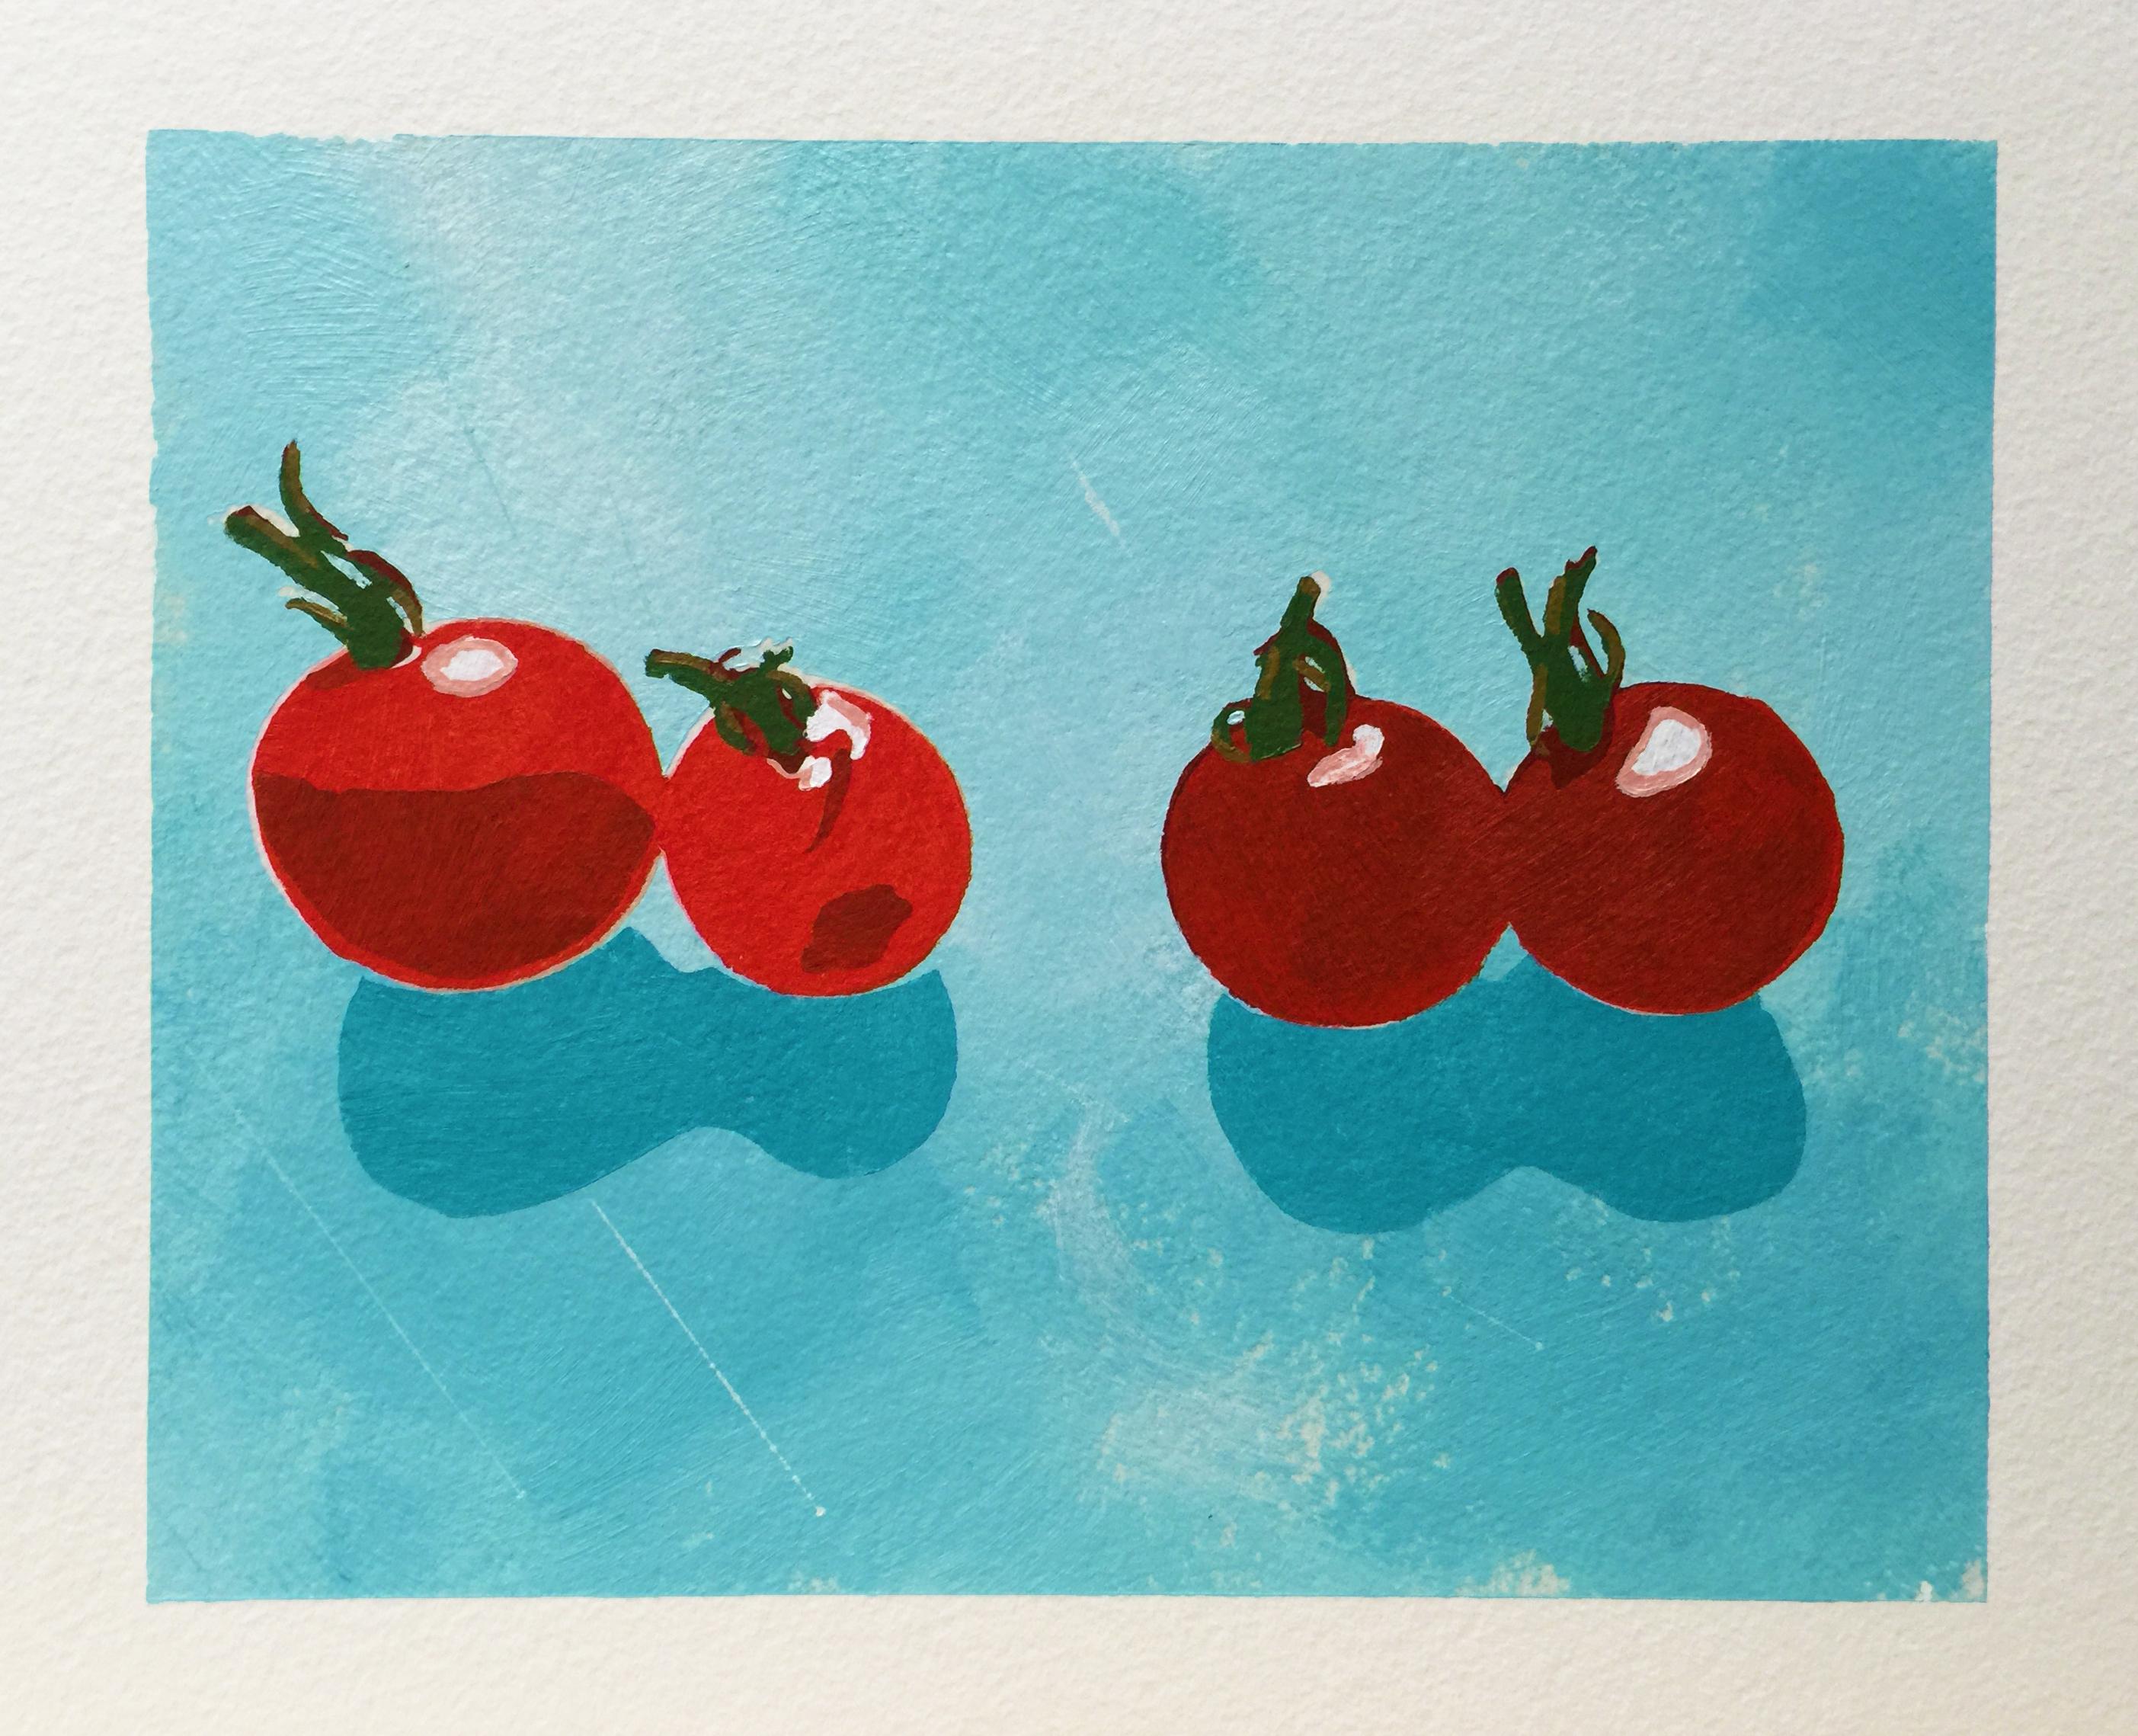 Tomato Lovers, Mixed Media on Watercolor Paper - Mixed Media Art by Dwayne Wolff